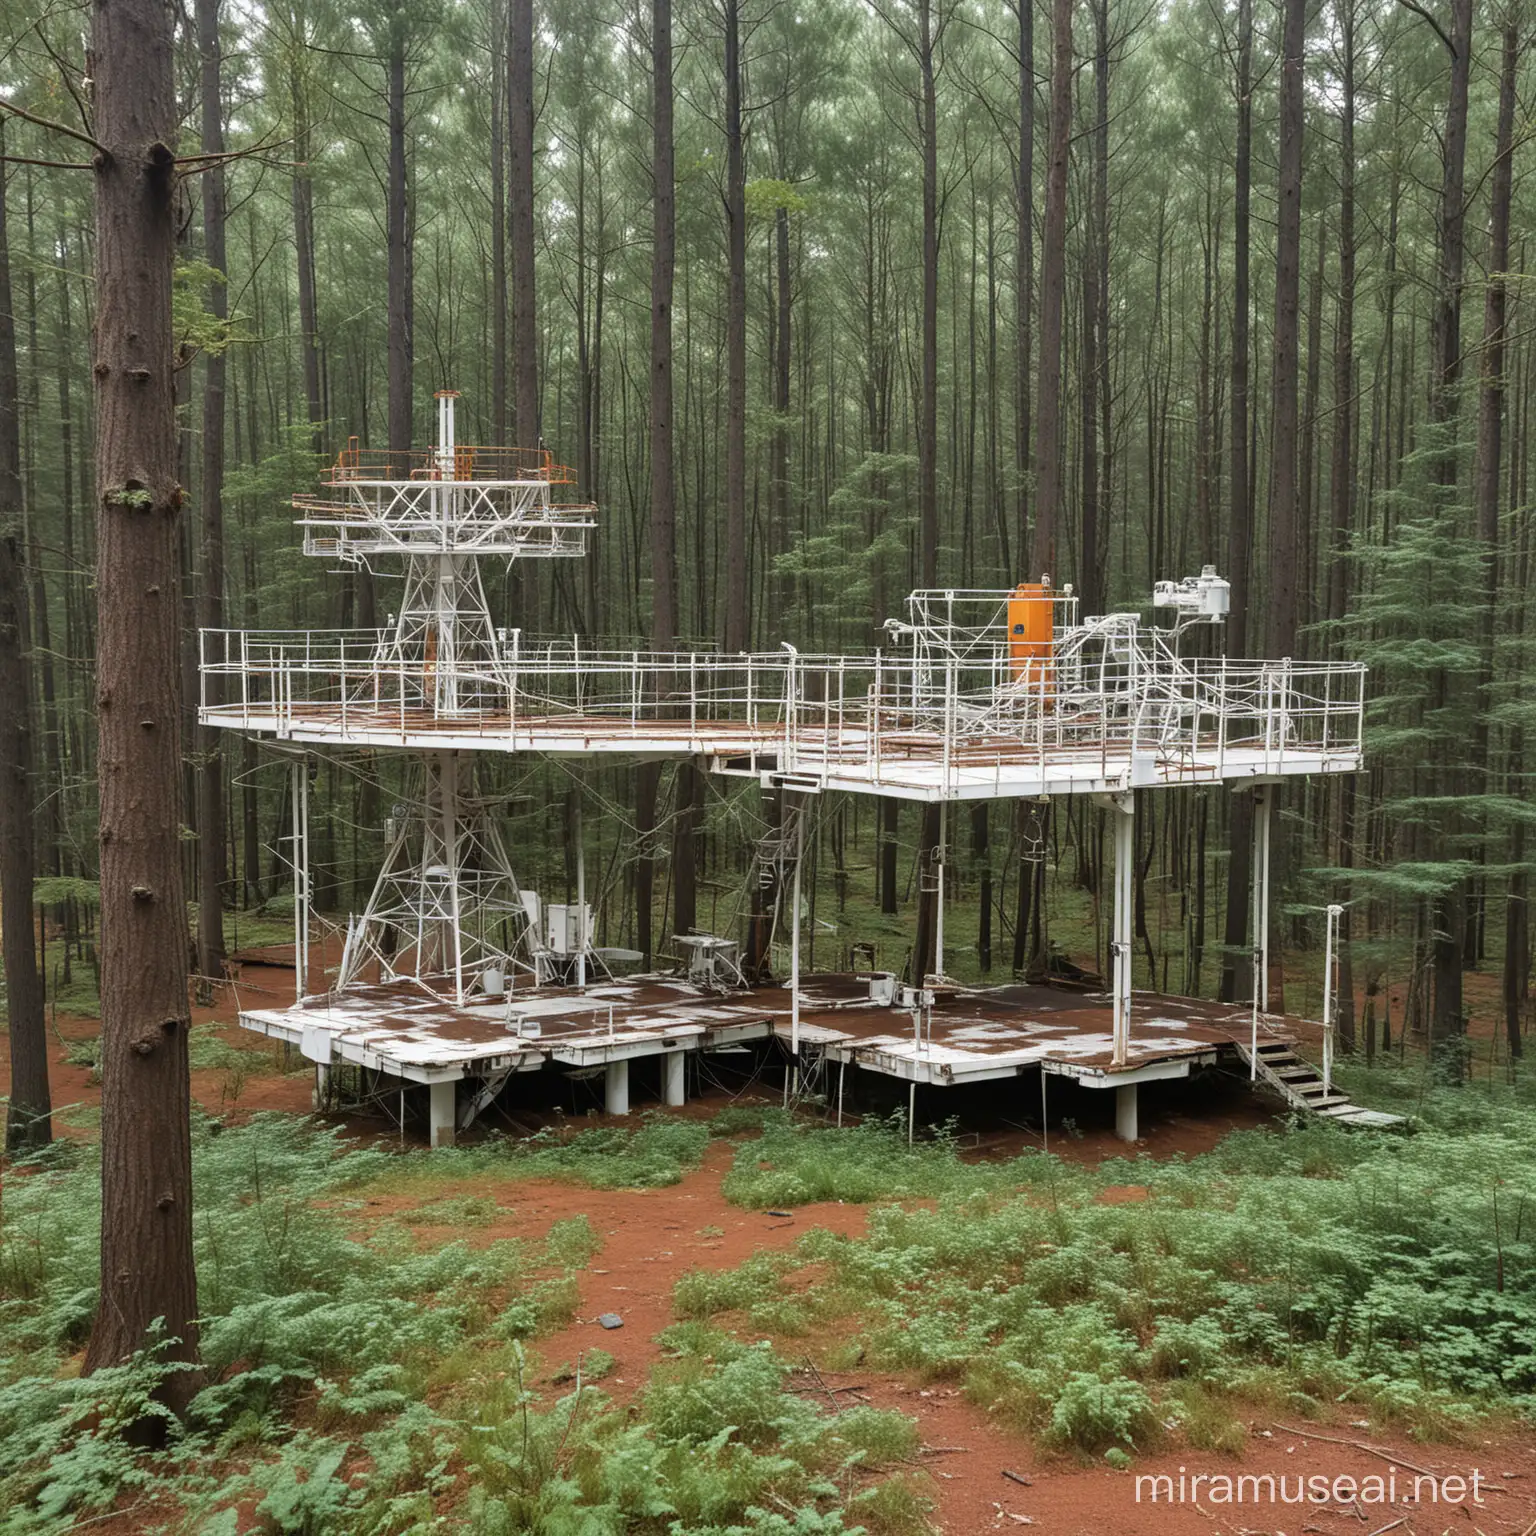 an area in the forest, there is a white platform elevated a little bit above the forest floor, on the white platform are multiple rusty antennaes, some old equipment for space observation. 